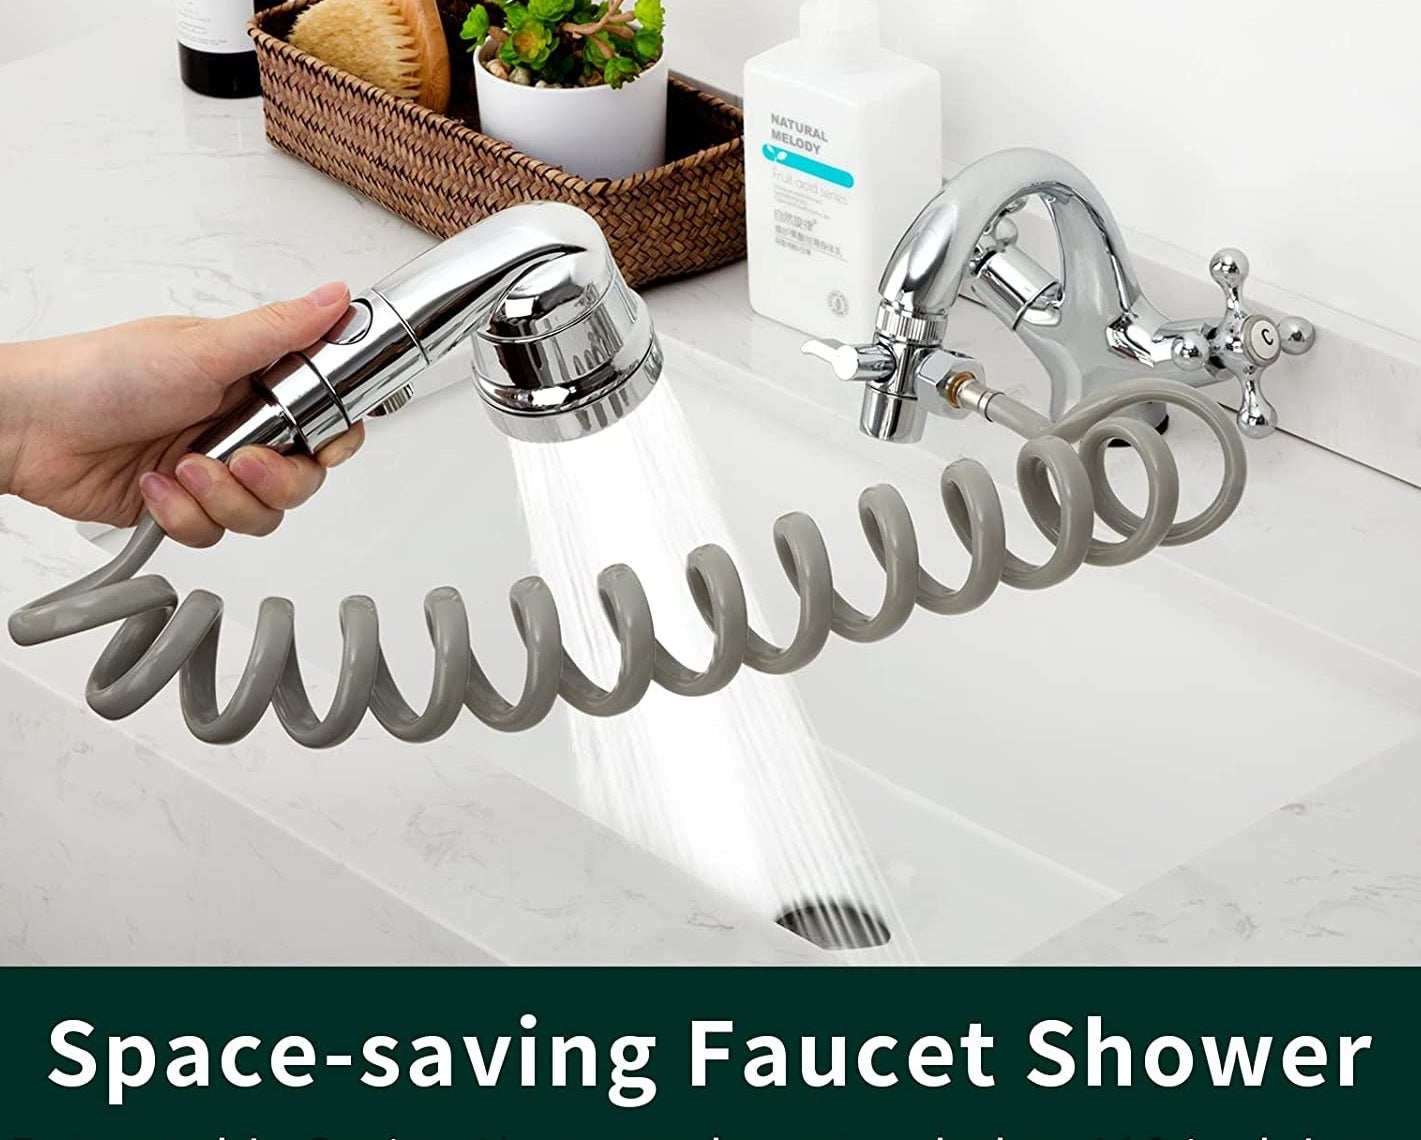 someone using the faucet-mounted showerhead